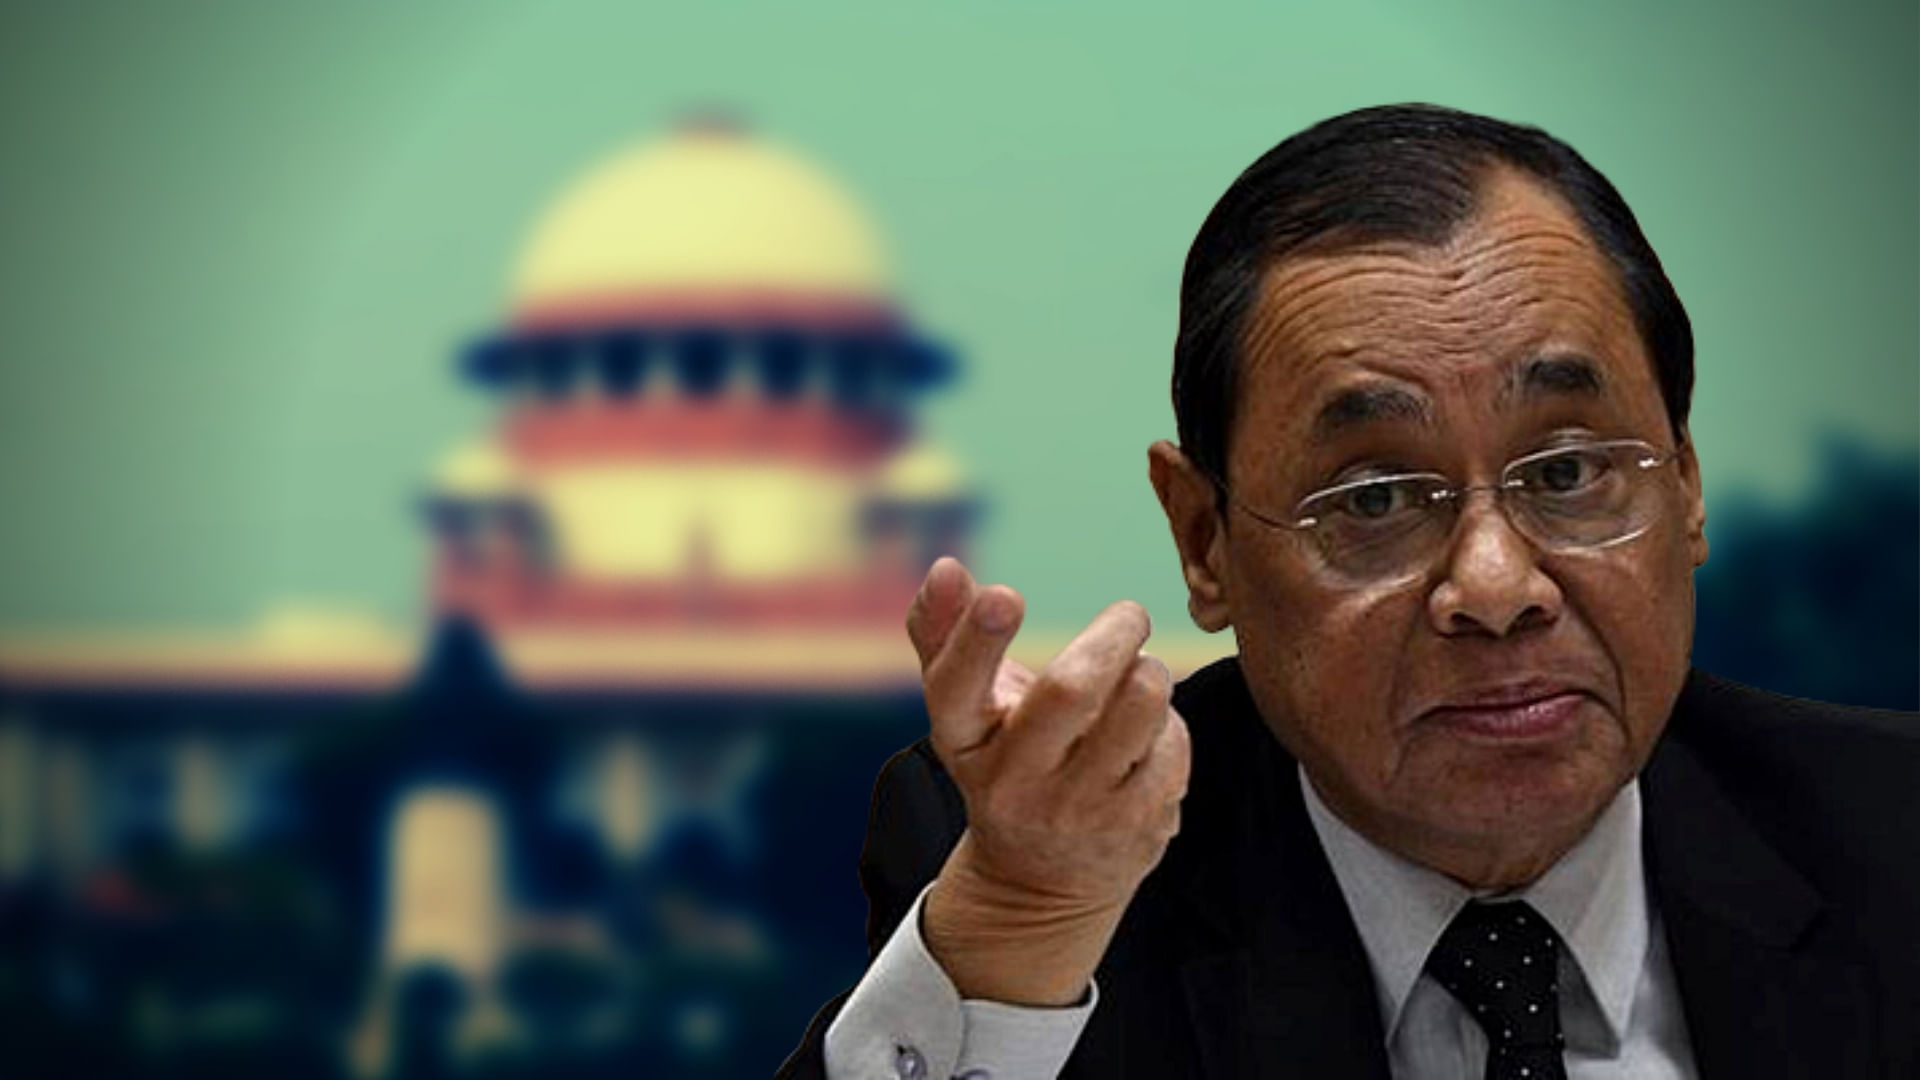 A woman has alleged that CJI Gogoi had made sexual advances on her while they were at his residence-office on 10 and 11 October, last year. 